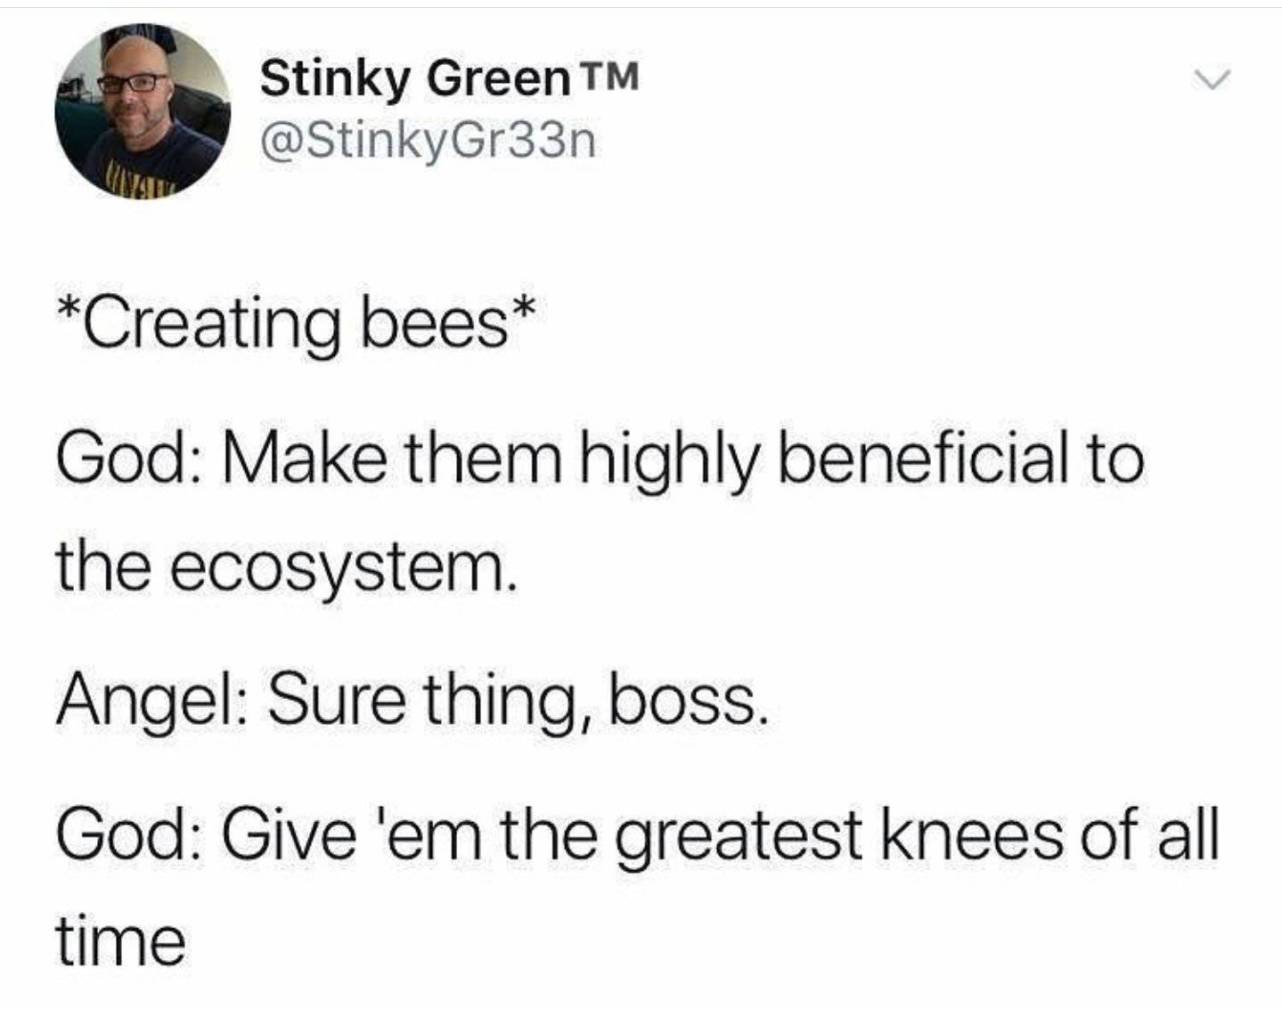 god creating bees - Stinky Green Tm Creating bees God Make them highly beneficial to the ecosystem. Angel Sure thing, boss. God Give 'em the greatest knees of all time